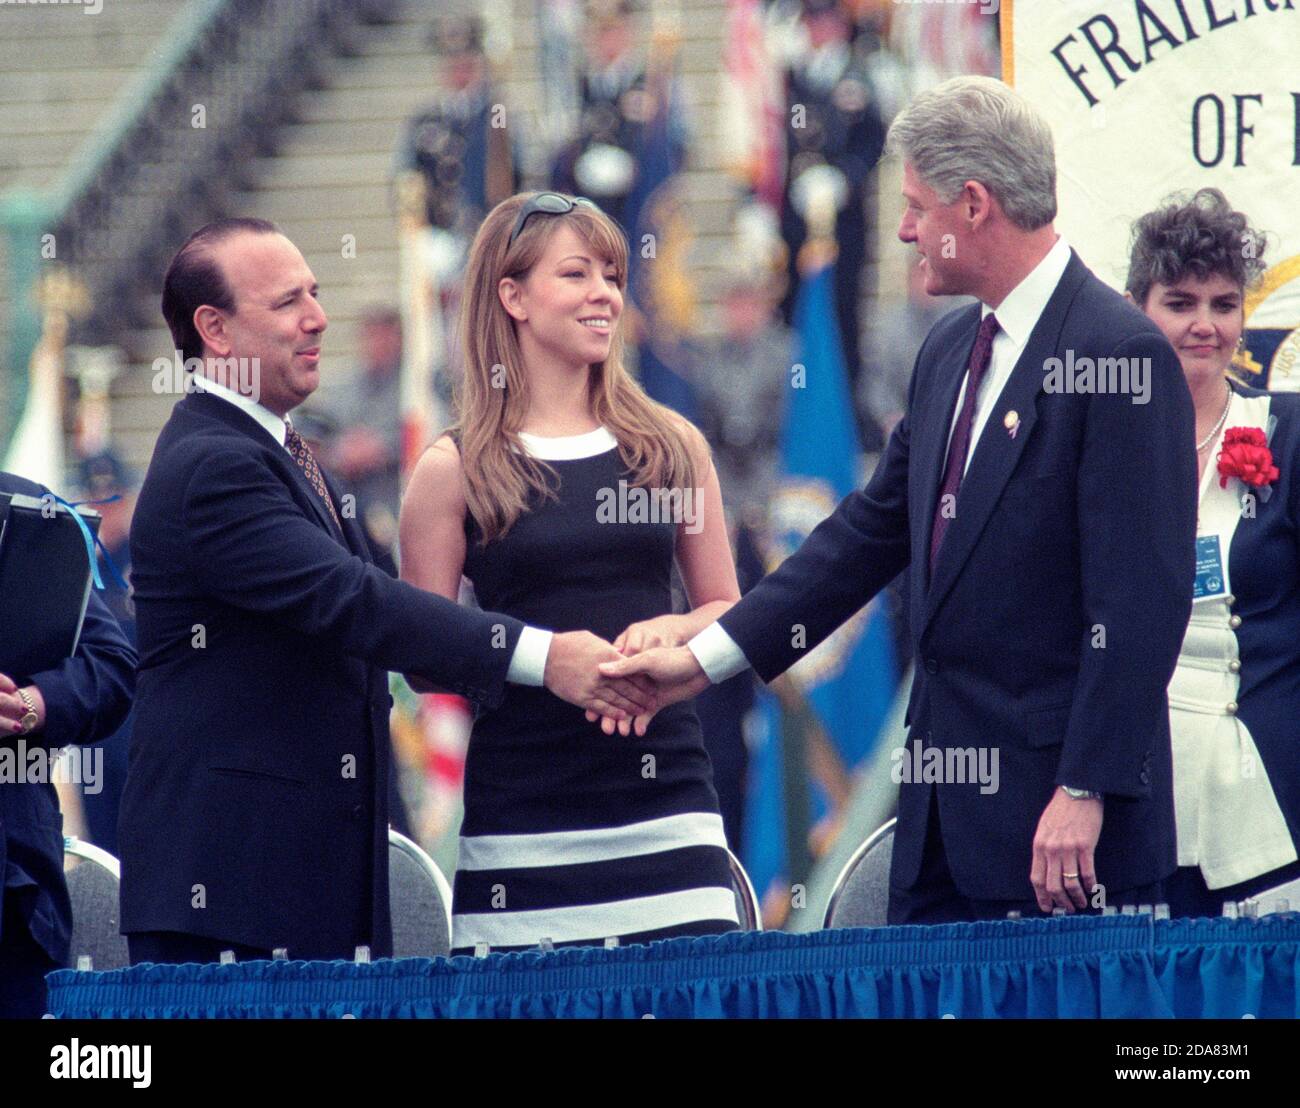 United States President Bill Clinton, right, shakes the hand of music producer and CEO of Sony Music Tommy Mottola, as singer Mariah Carey, center, looks on at the United States Capitol during the 15th Annual National Peace Officers Memorial Day Service in Washington, DC on May 15, 1996. Photo by Francis Specker Stock Photo